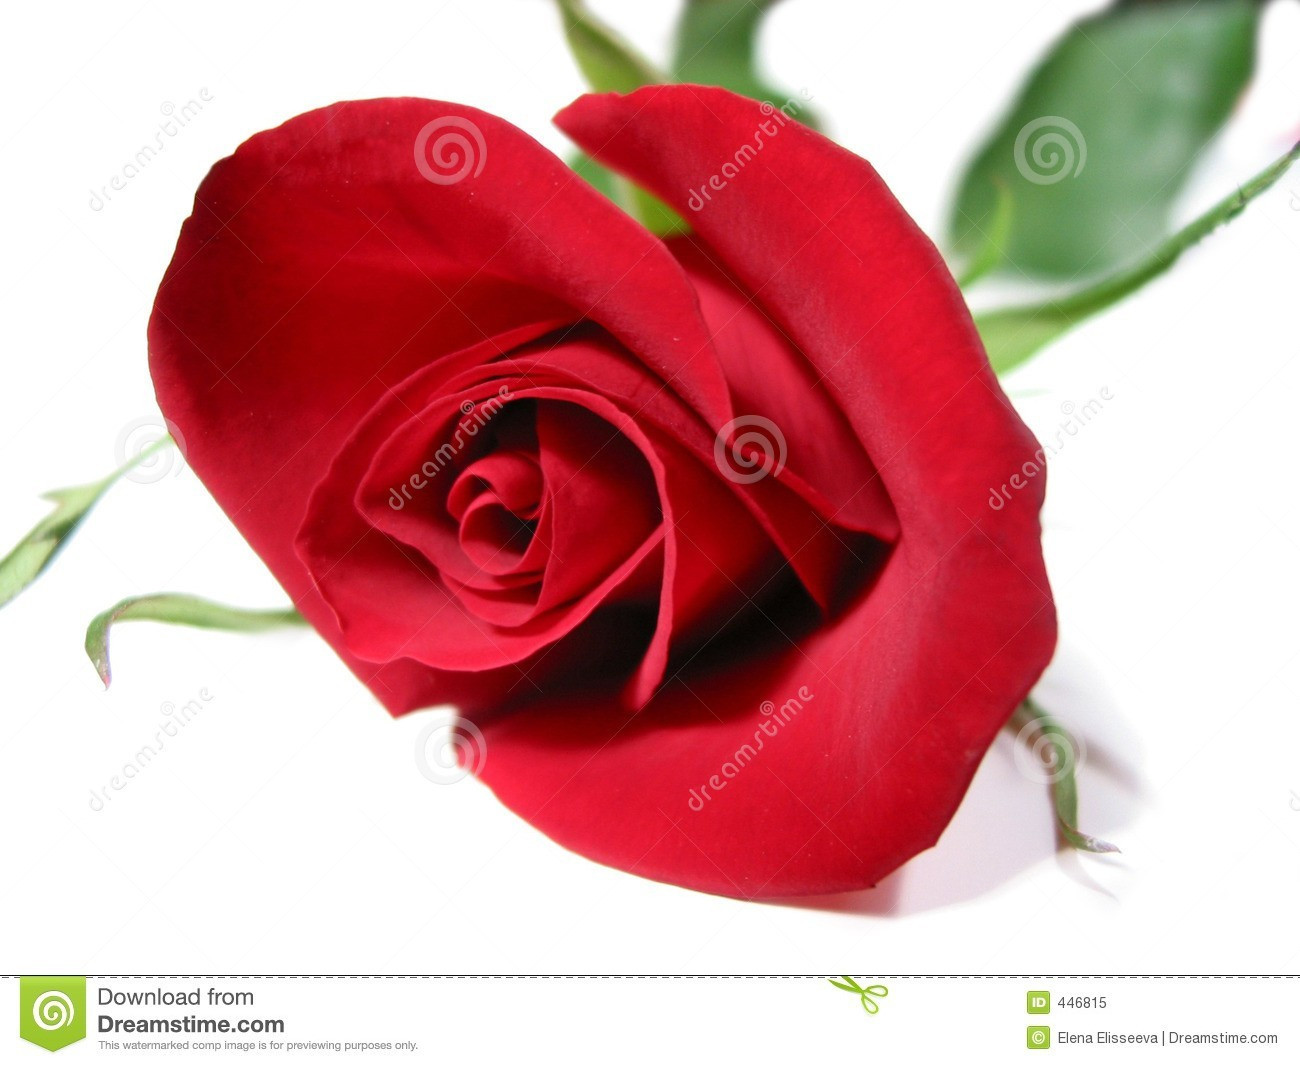 11 Popular Red Rose Vase 2024 free download red rose vase of red and white rose photos luxury luxury lsa flower colour bud vase for red and white rose photos fresh red rose flower wallpapers inspirational https s media cache ak0